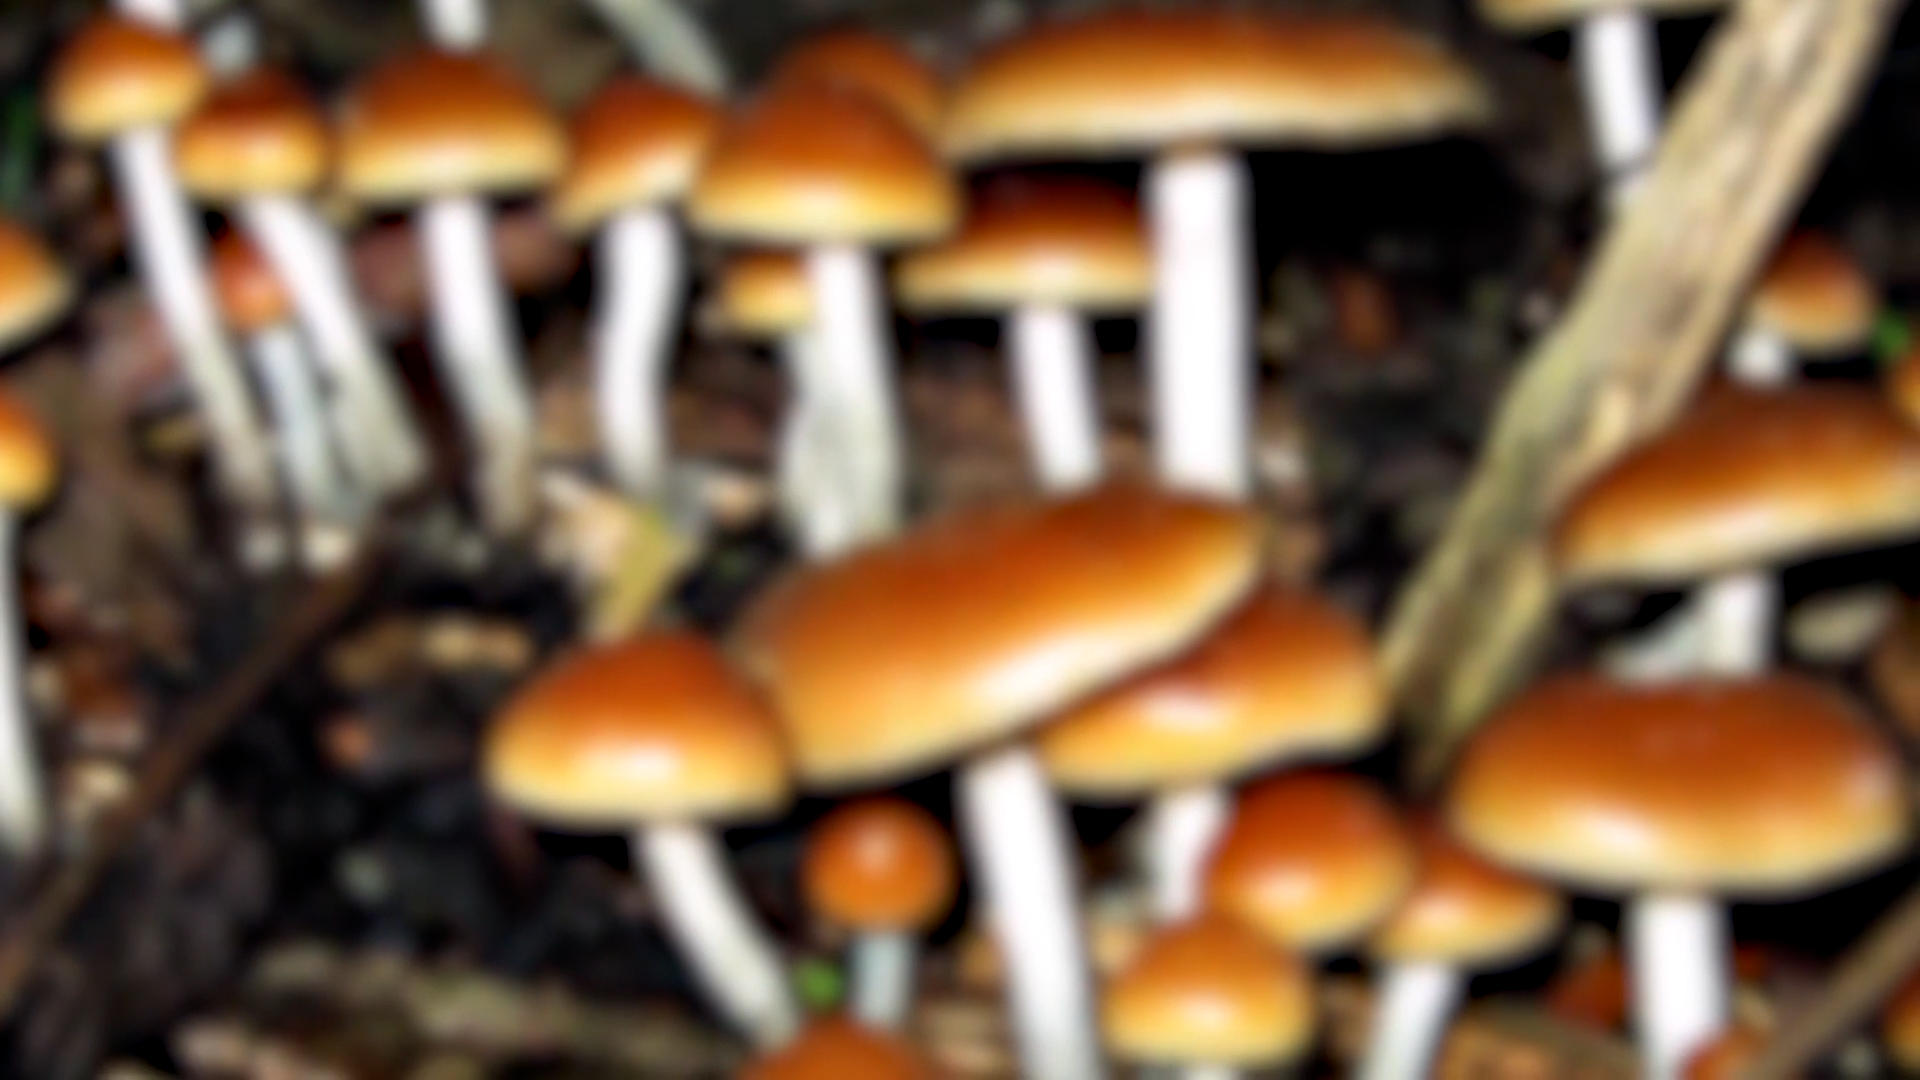 Decriminalizing psilocybin mushrooms has passed, but not everyone is excited about it